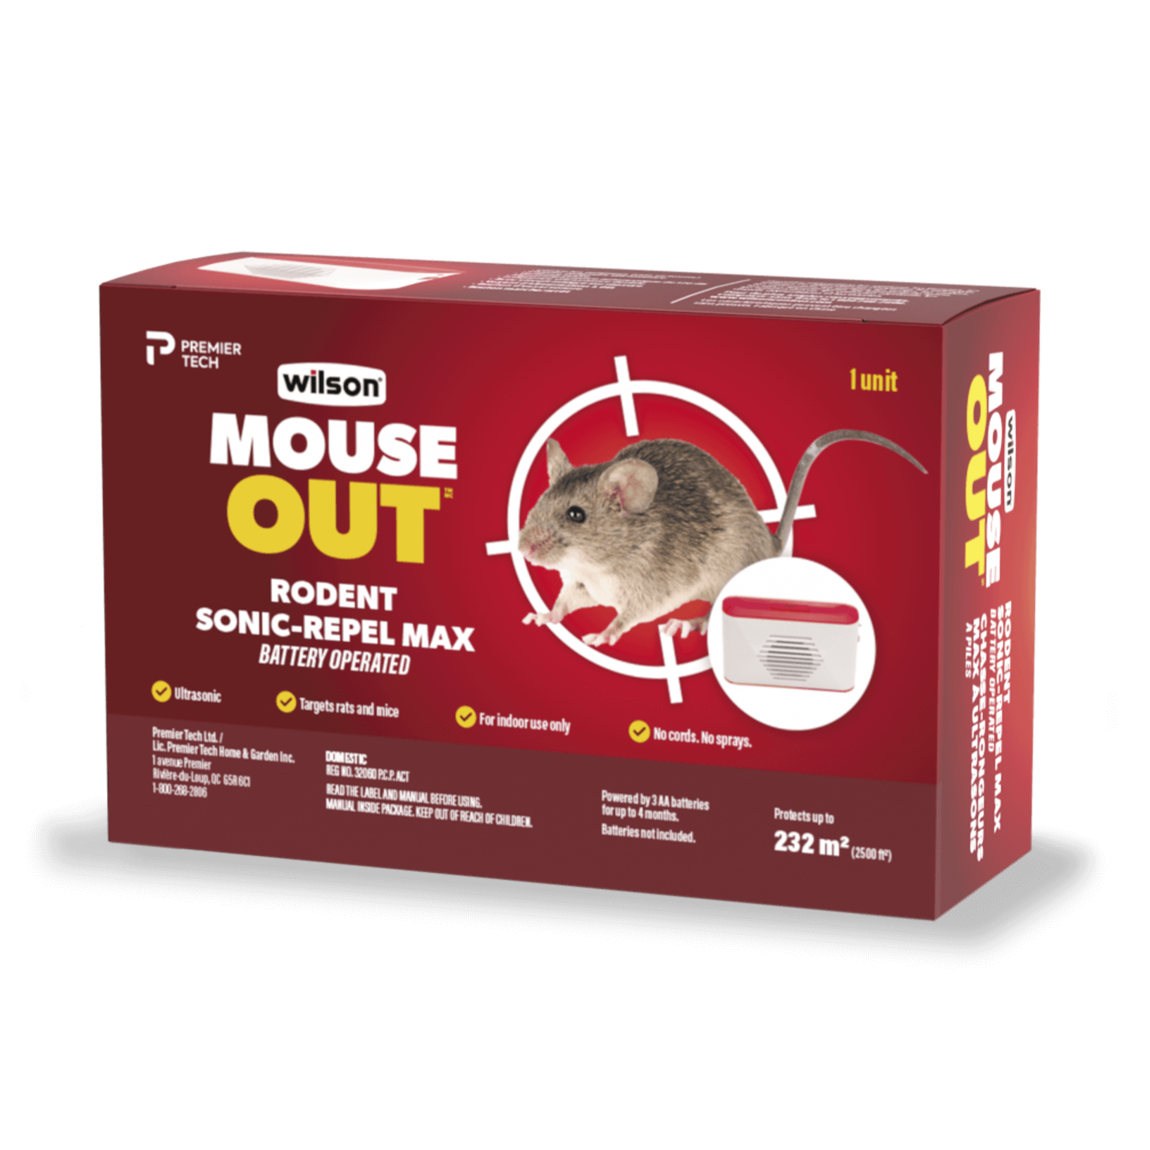 https://www.wilsoncontrol.com/sites/ptgc_wilson/files/styles/swiper_gallery_image/public/2022-01/wilson-mouse-out-rodent-sonic-repel-max.png?itok=O_saJ7Uu